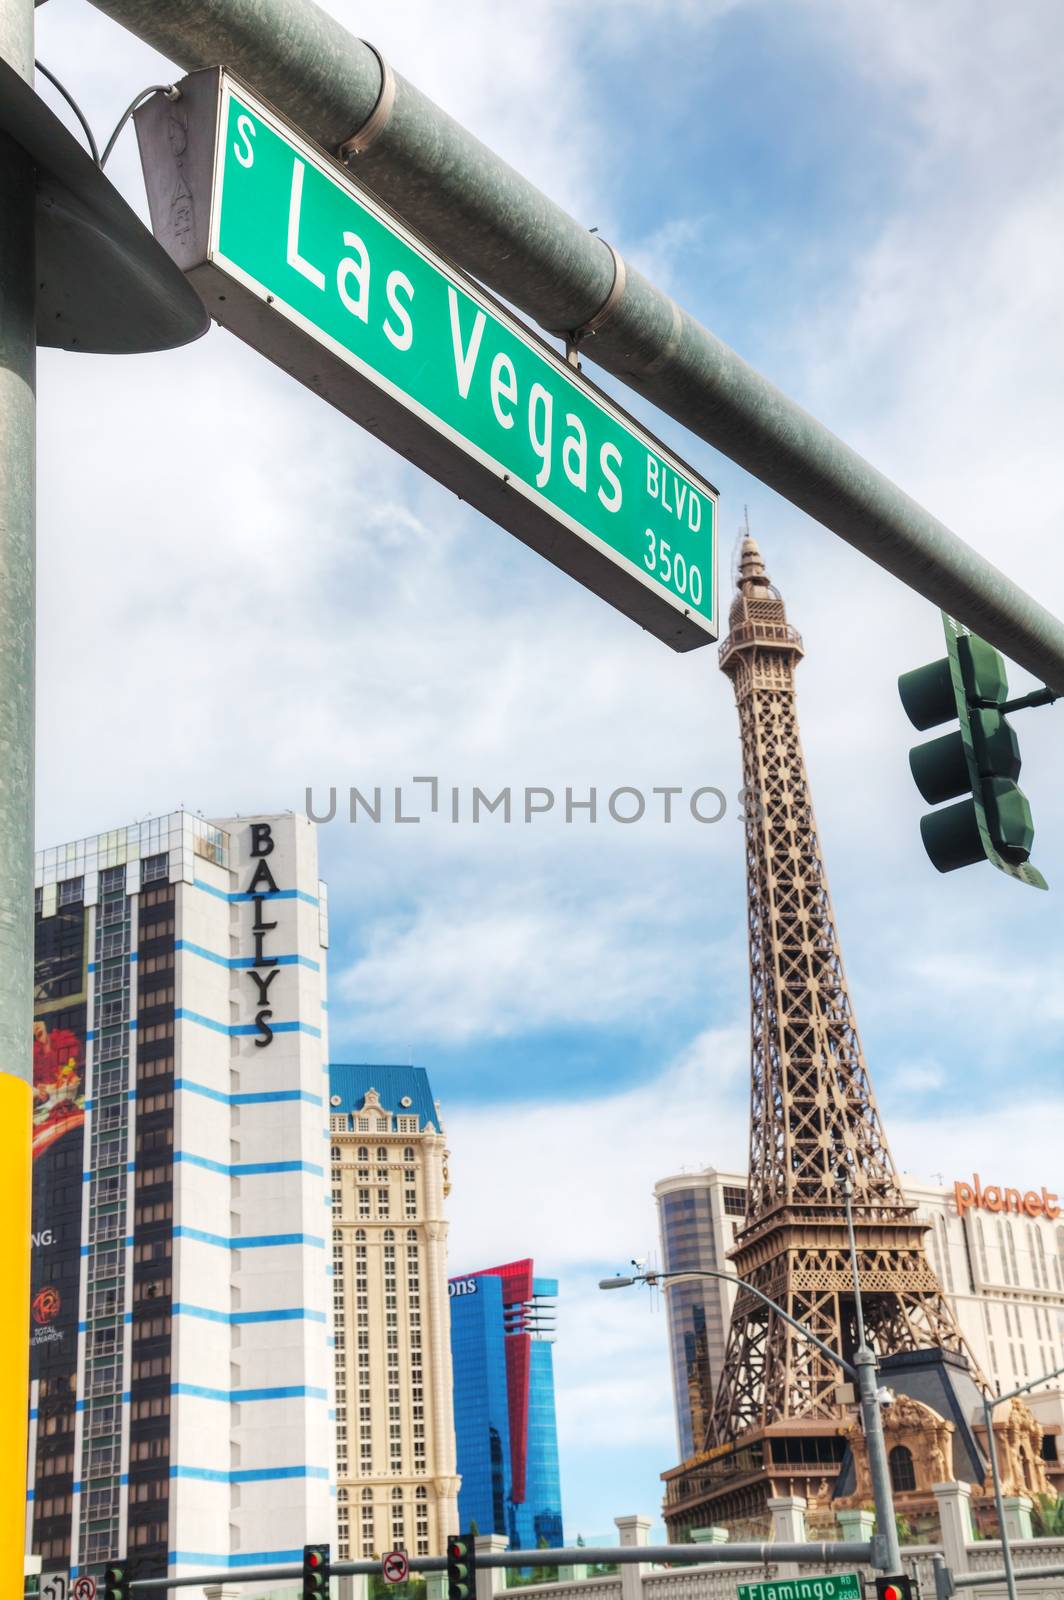 Las Vegas boulevard in the morning by AndreyKr